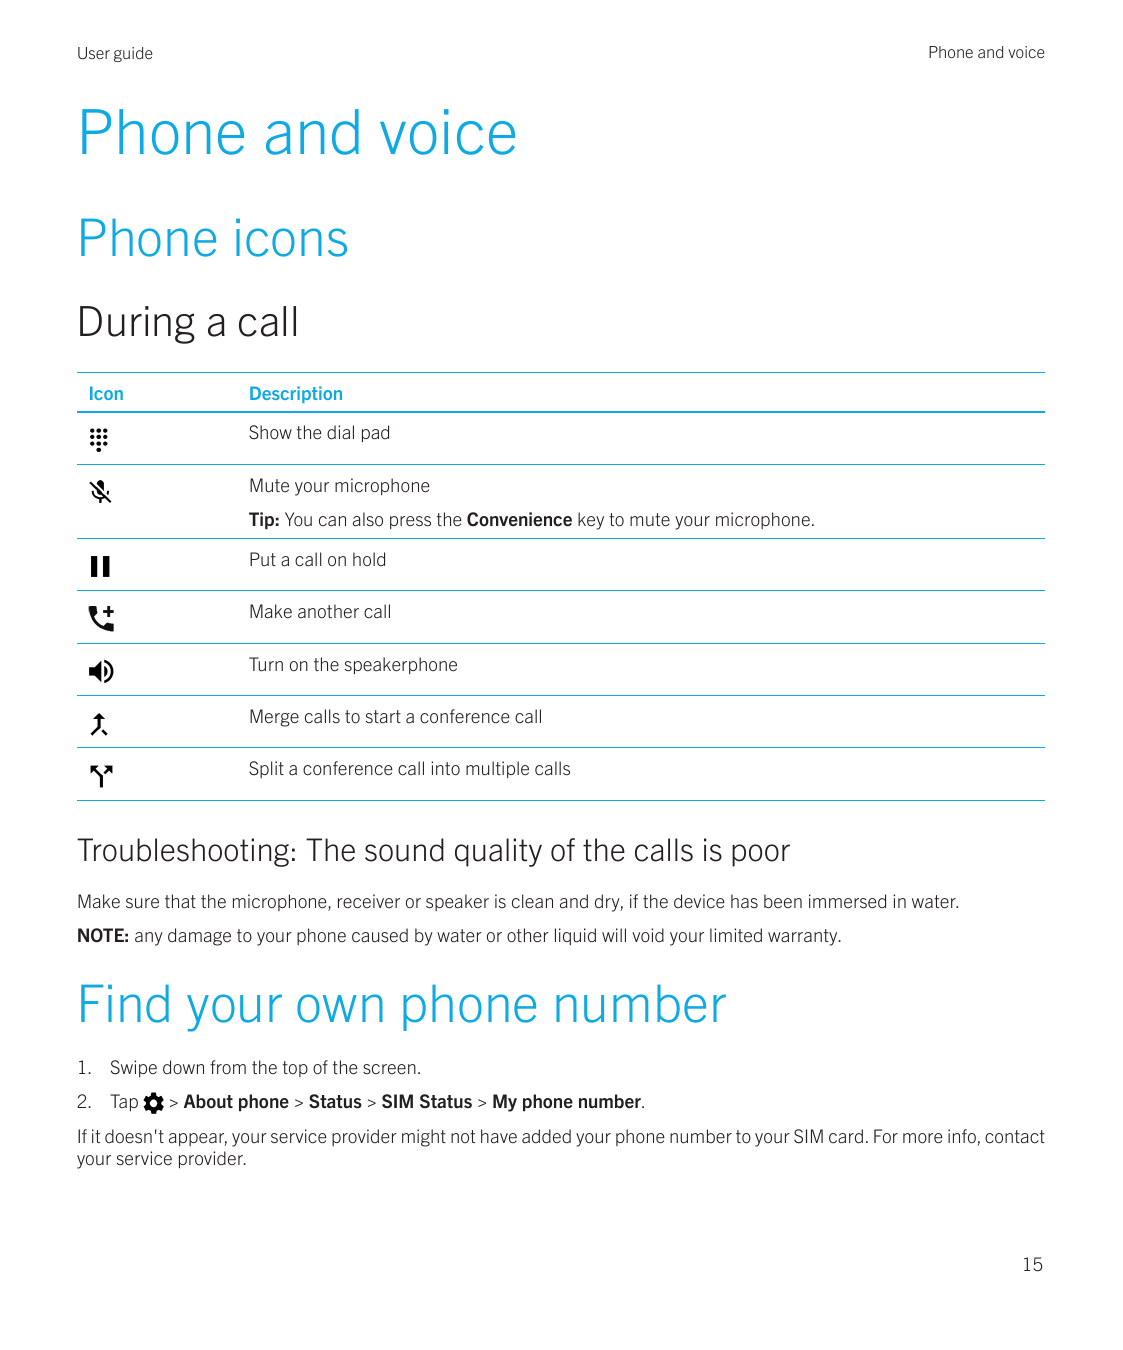 Phone and voiceUser guidePhone and voicePhone iconsDuring a callIconDescriptionShow the dial padMute your microphoneTip: You can